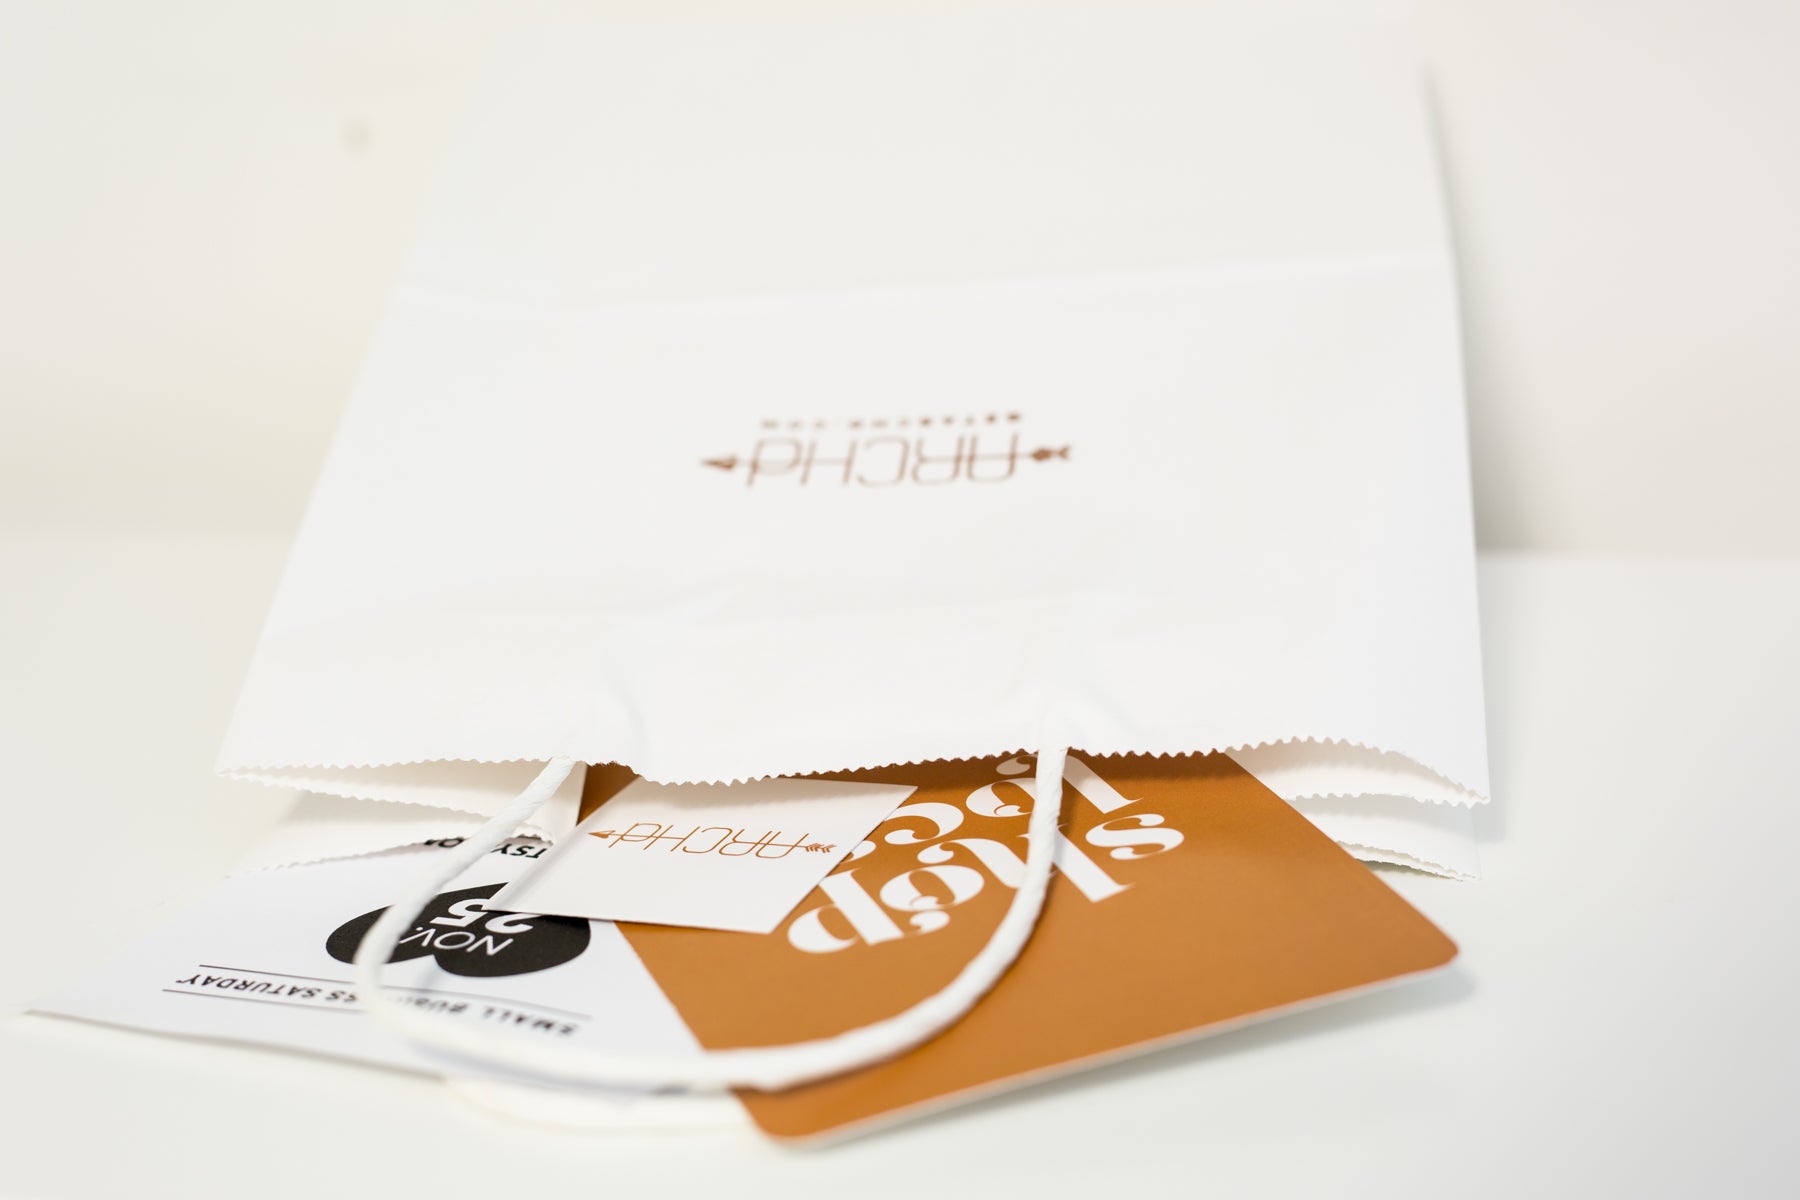 Vendor booth idea tip stamp logo on white paper bags for customers ARCHd